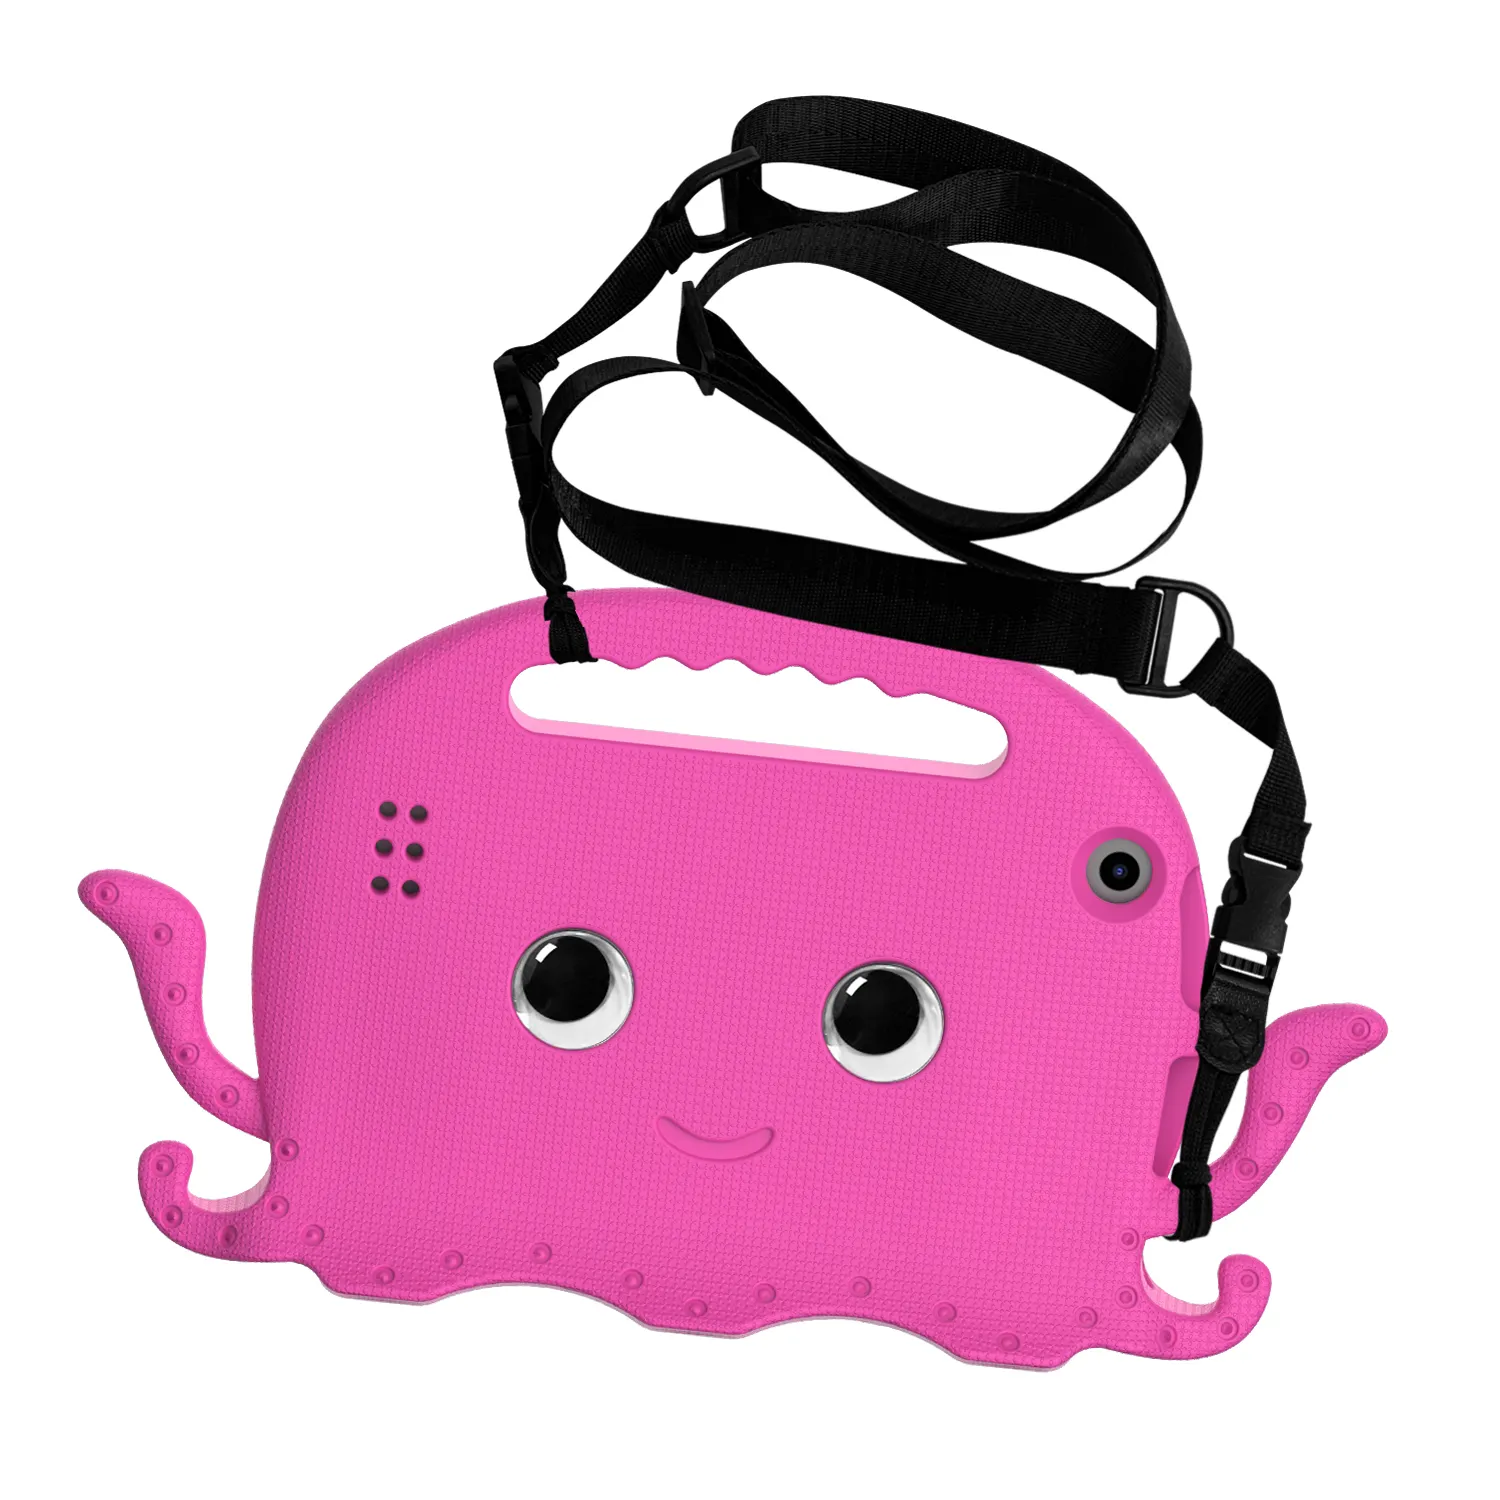 Universal Octopus design EVA Anti Drop Back Stand Children Tablet Shell Case Cover for Amazon Kindle Fire HD 7